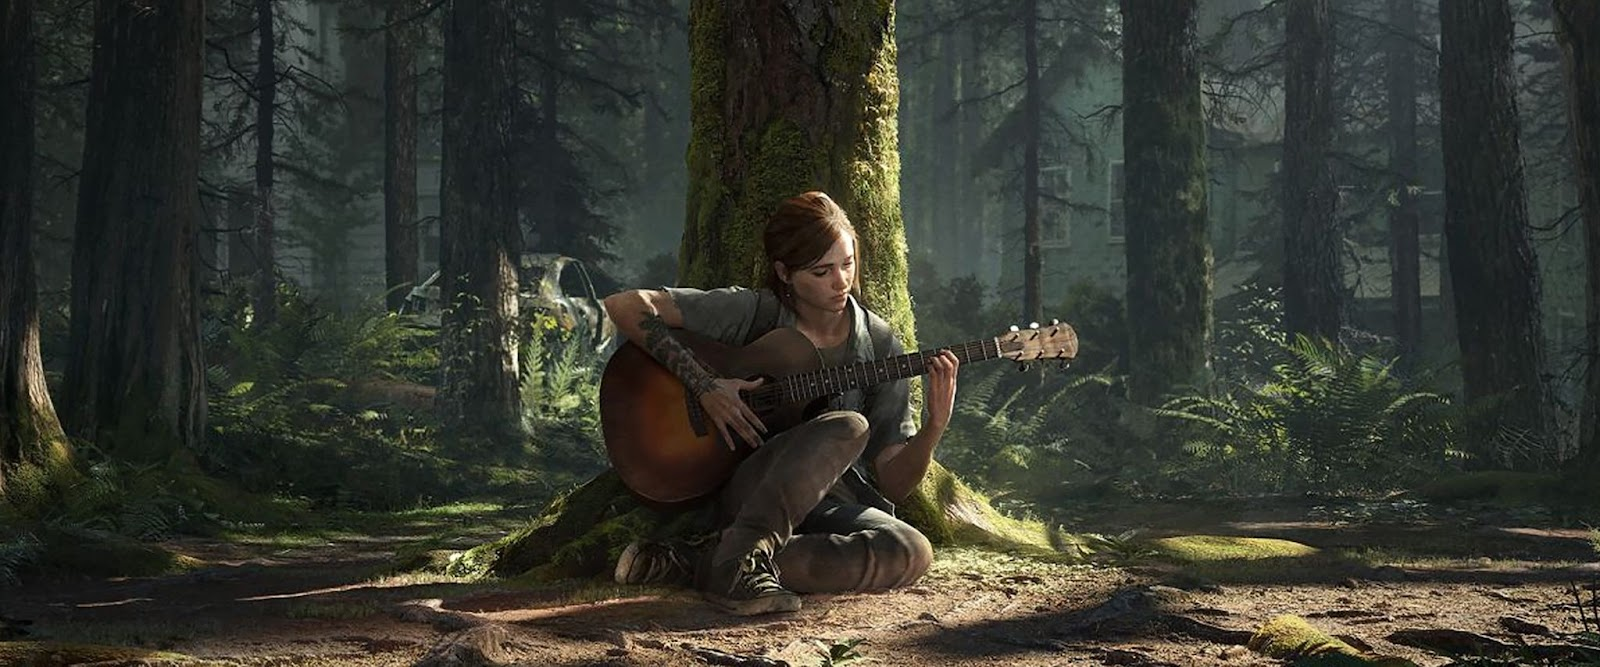 Why The Last of Us Is Perfect as an HBO Series - IGN